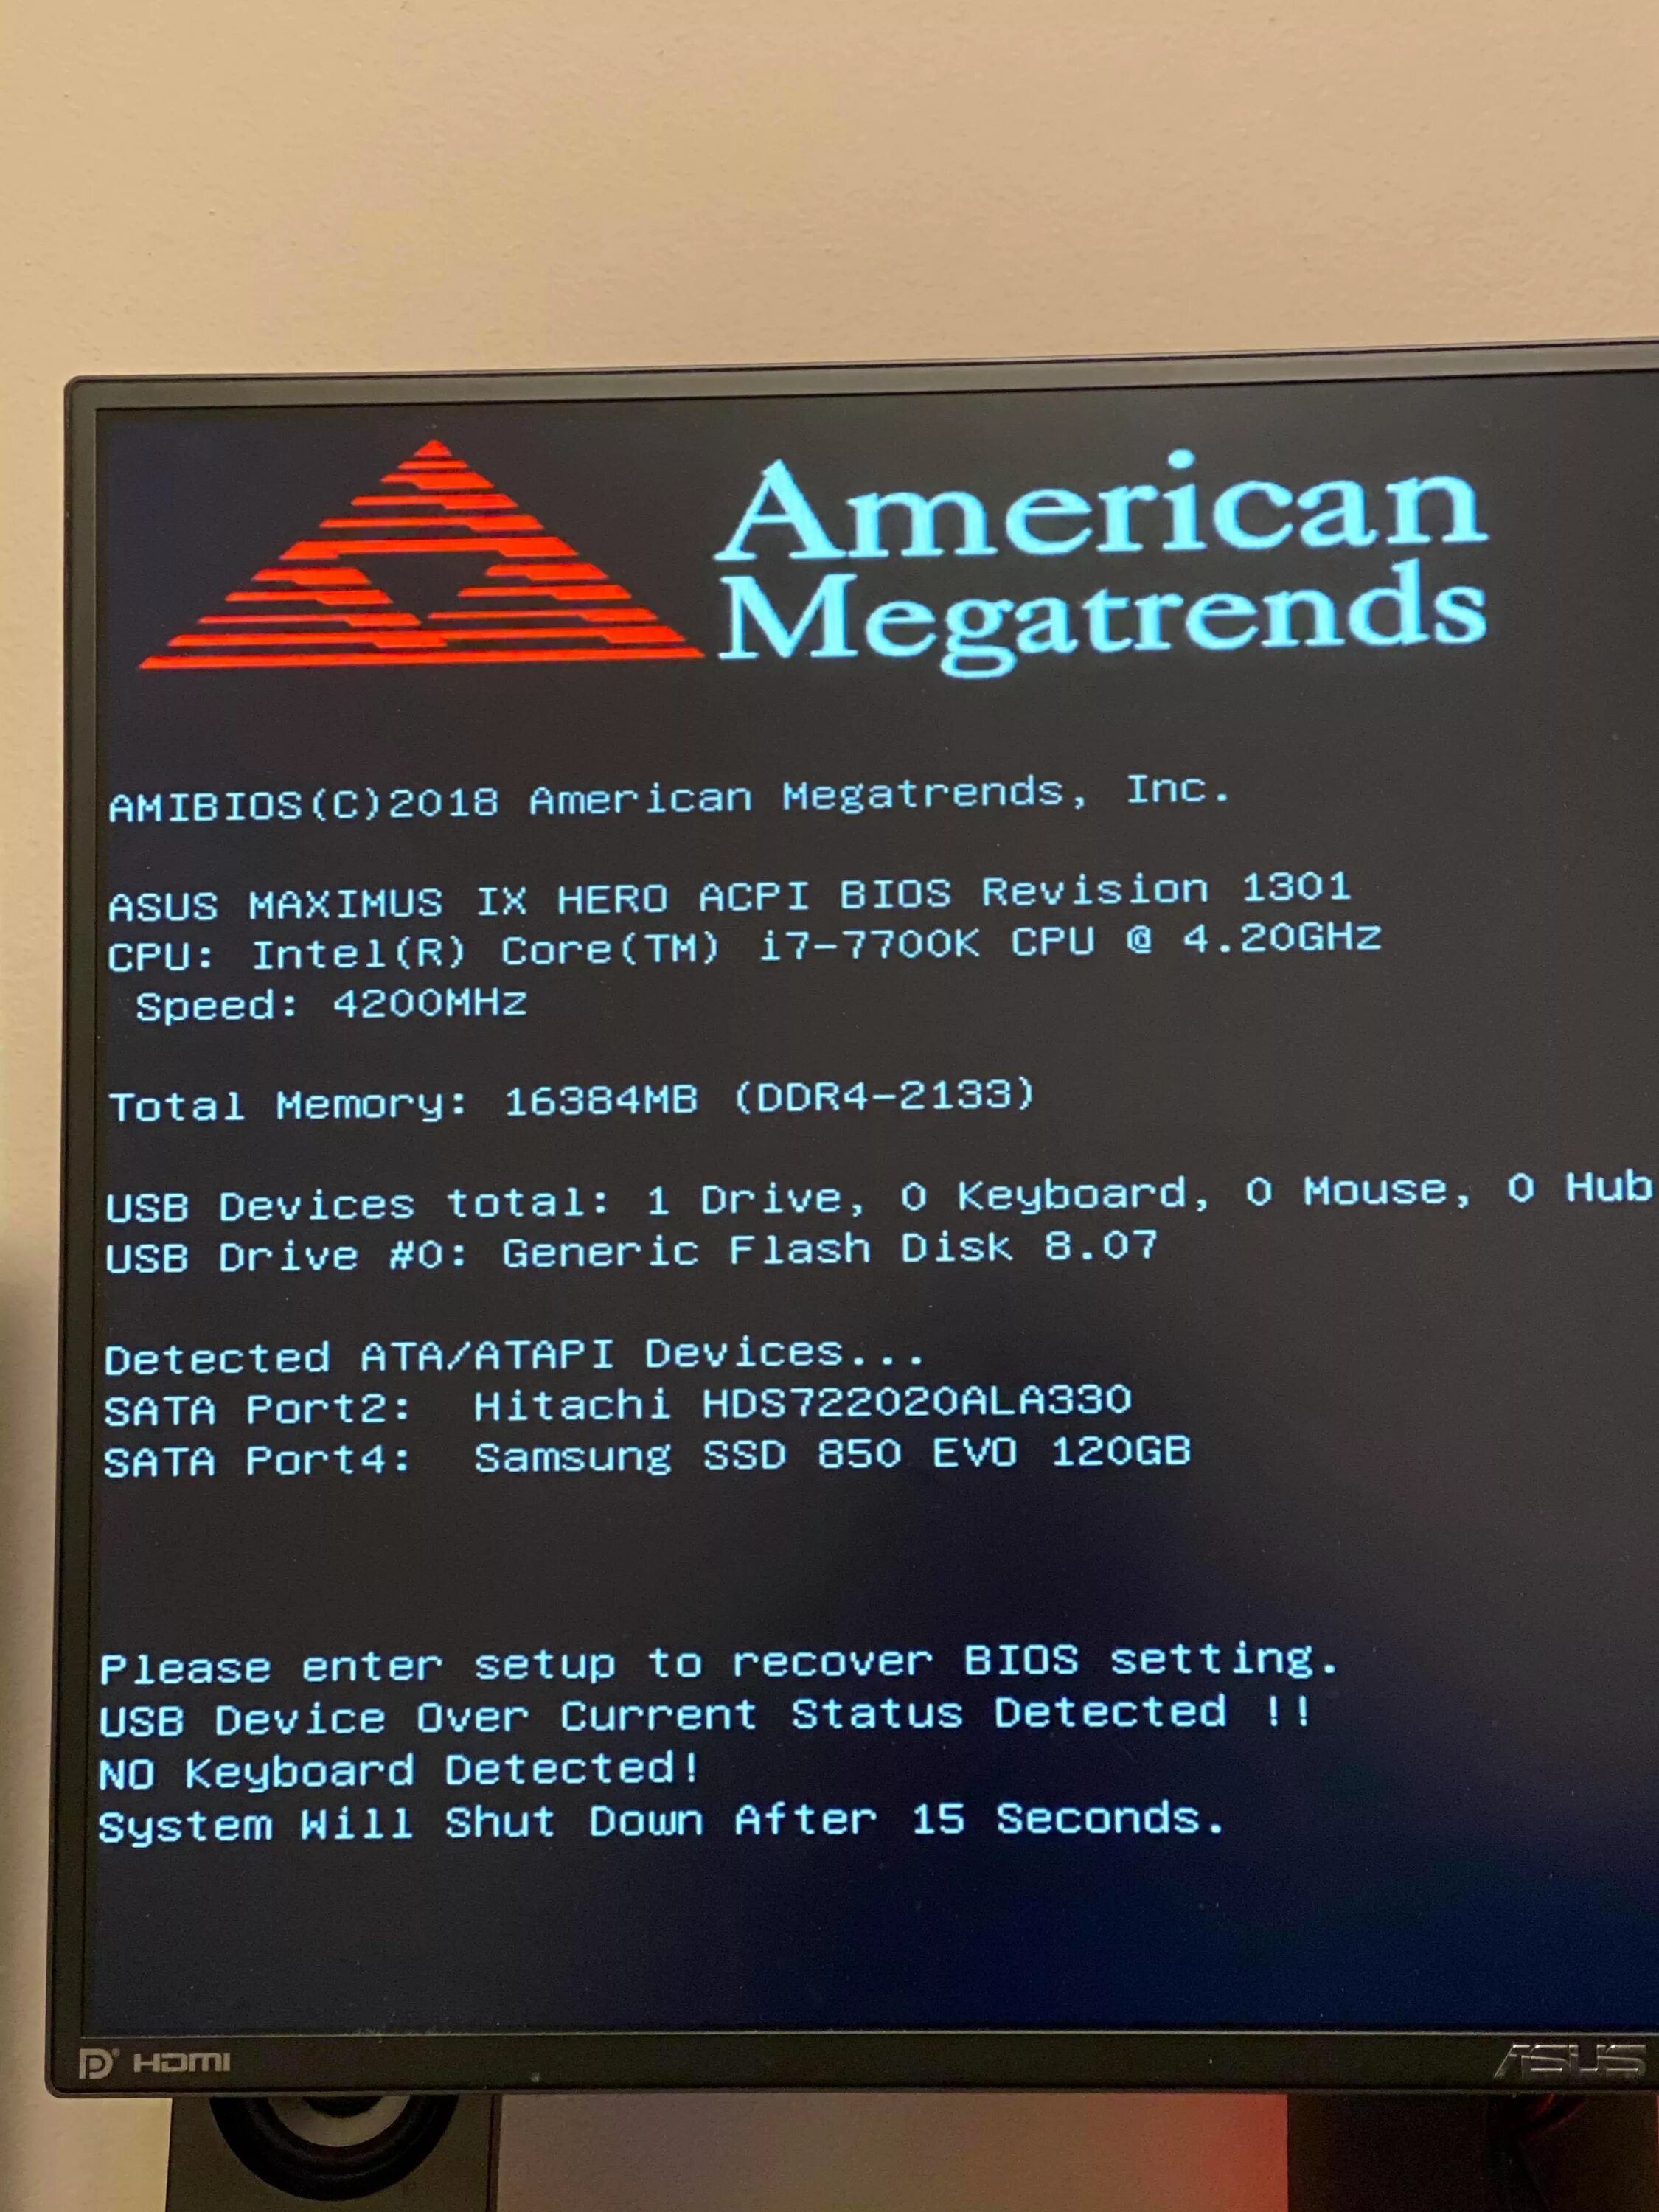 Over current status. Please enter Setup to recover BIOS setting. USB device over current detected. American MEGATRENDS please enter Setup to recover BIOS setting. USB over current status detected.